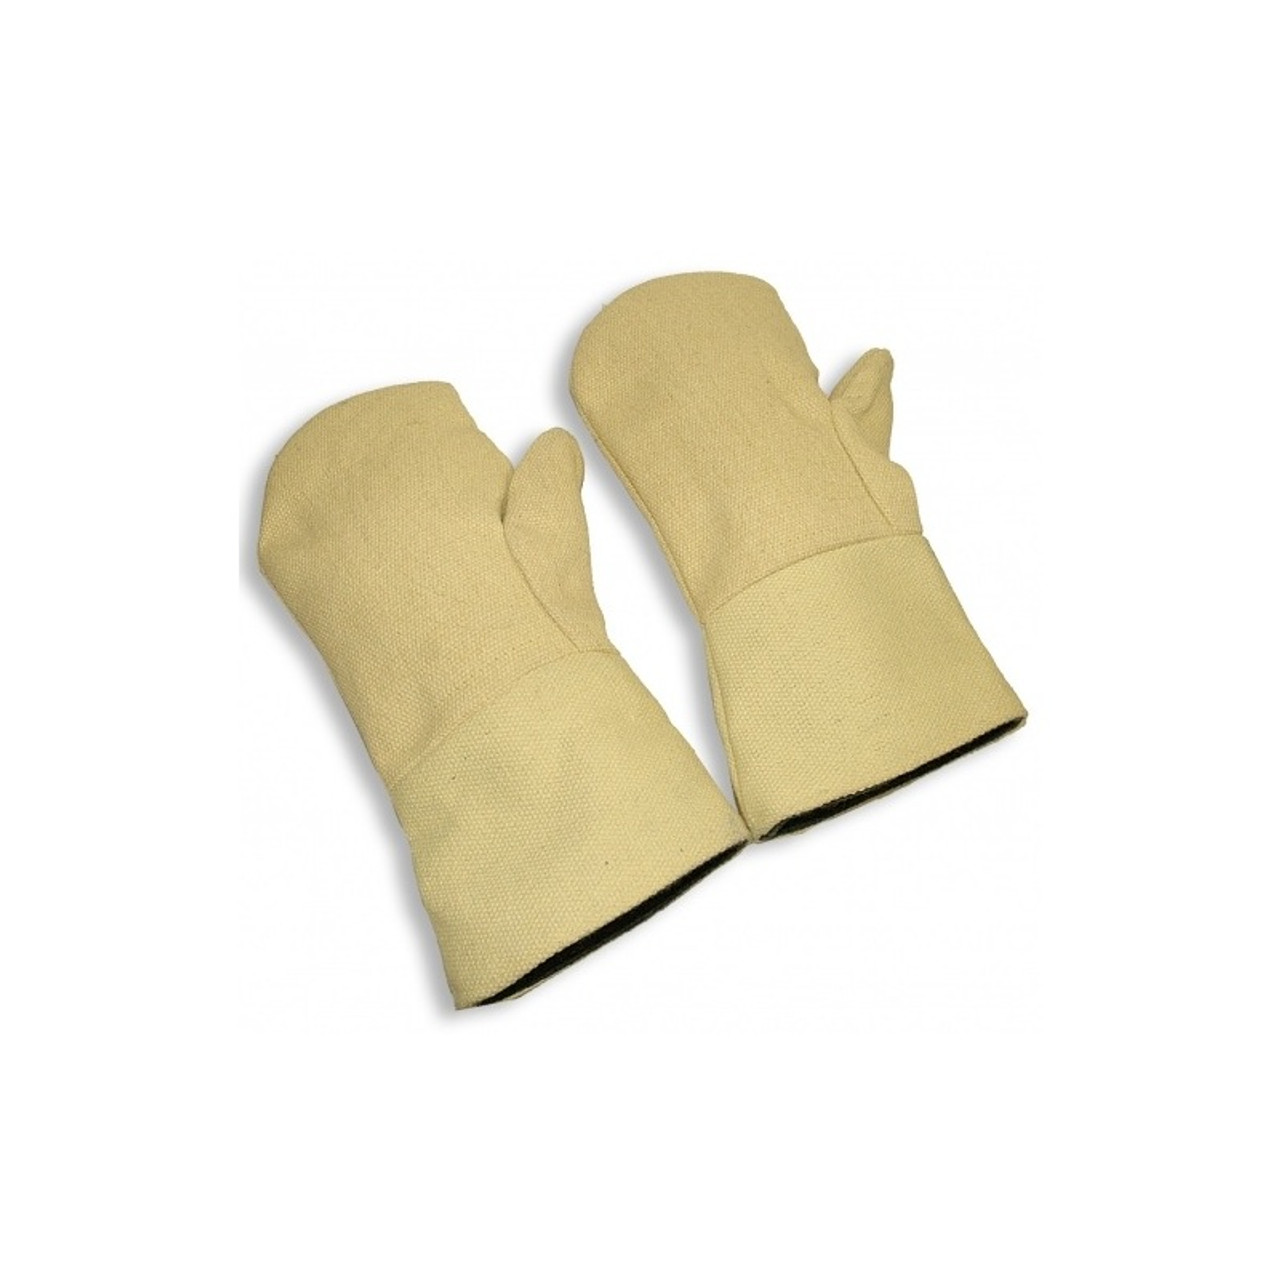 Steel Grip Th 252R-14 22 Oz. Thermonol Mitt With Wool Liner